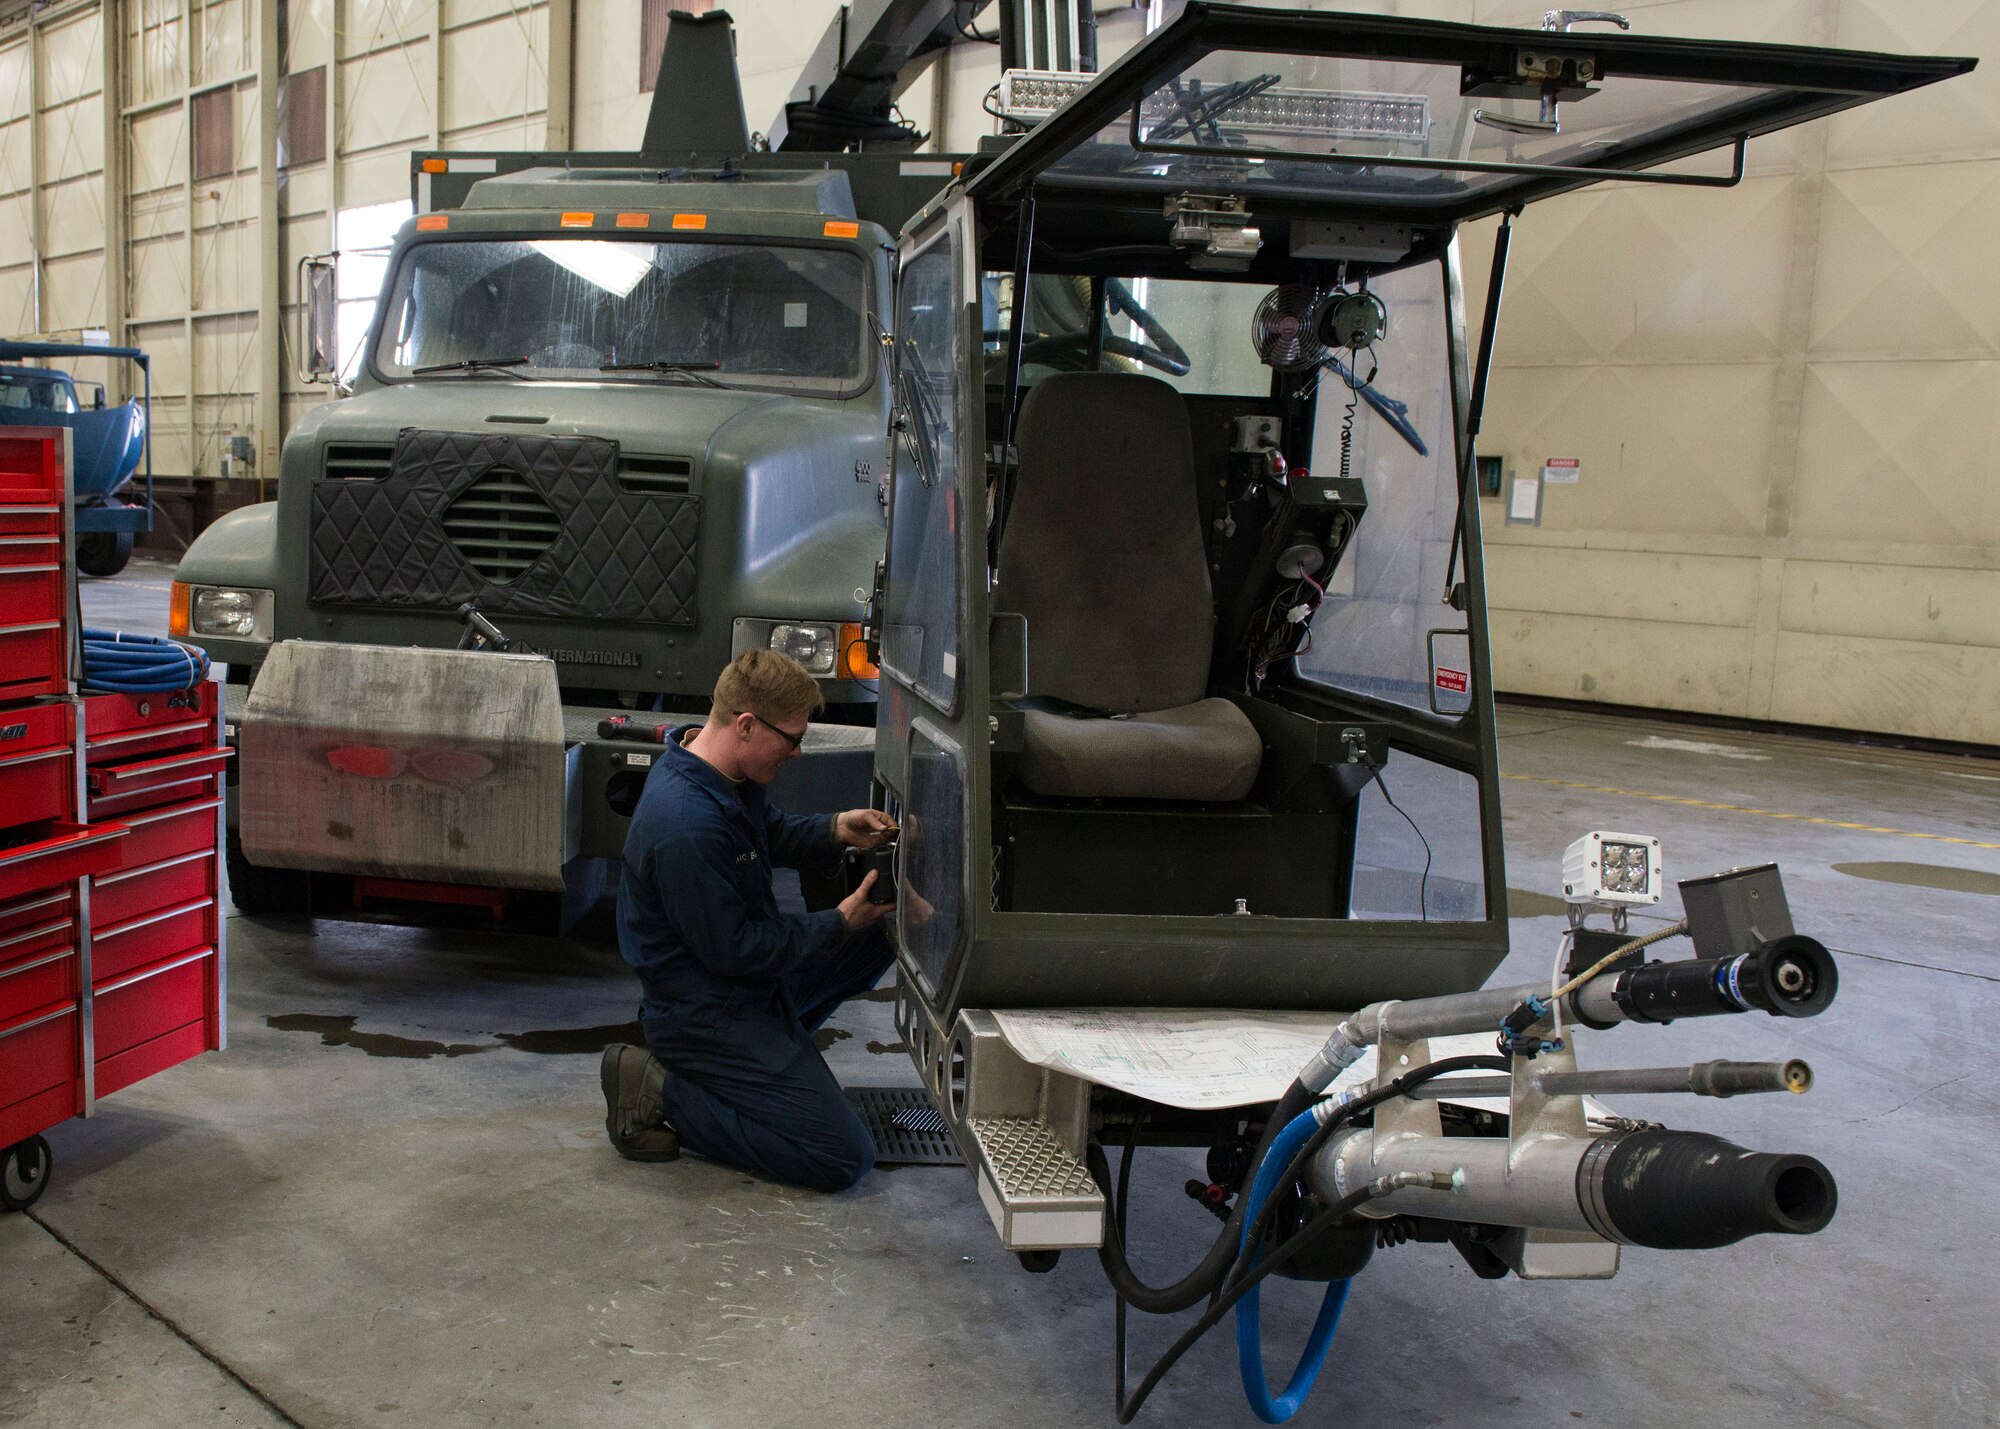 Airman 1st Class Craig Boudreau, a vehicle maintainer with the 673d Logistics Readiness Squadron, replaces a heater on a Global de-icer 1800 March 6, 2018, at Joint Base Elmendorf-Richardson, Alaska. Boudreau was handpicked to travel with an extended-reach deicer from Joint Base Elmendorf-Richardson, Alaska, to Gangneung Air Base, Republic of Korea, in support of Vice President of the United States Michael Pence’s visit to the Pyeongchang 2018 Winter Olympics.